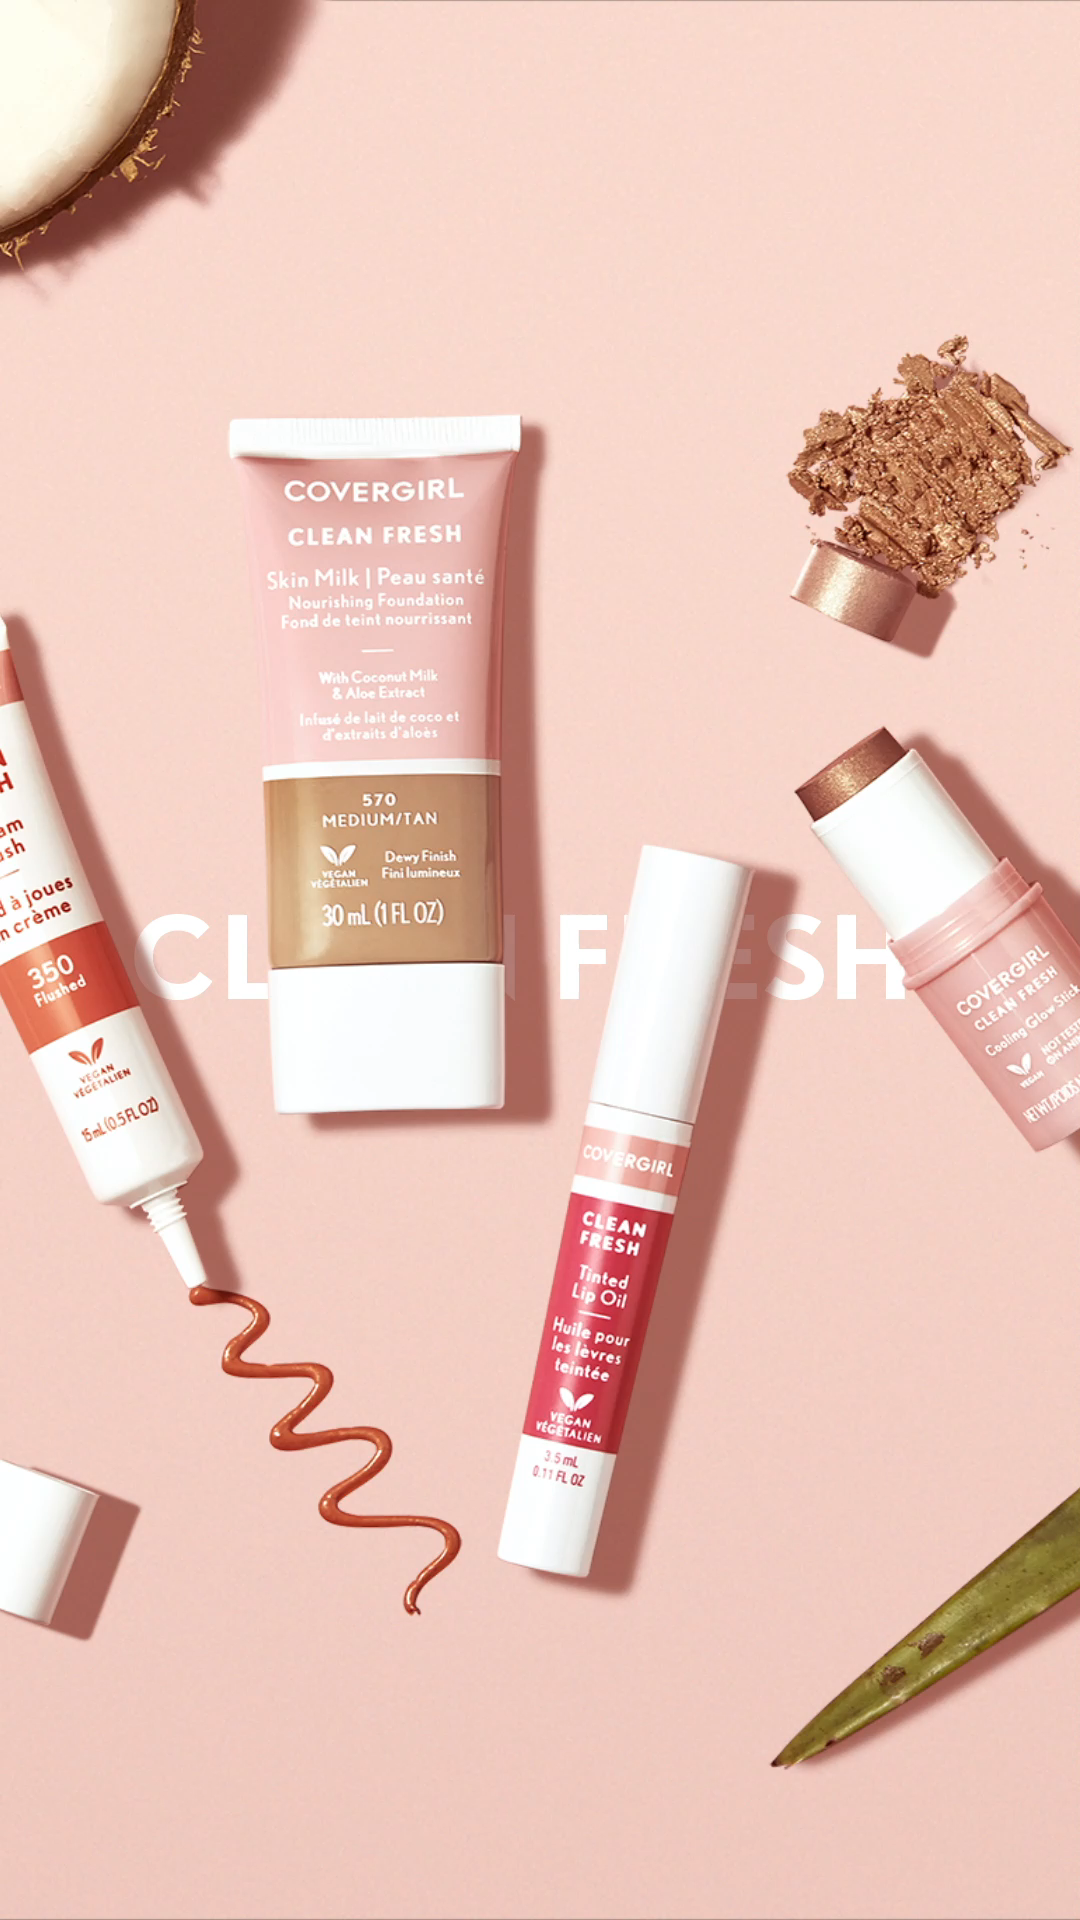 New Clean Fresh Collection By COVERGIRL® For A Fresh, Healthy, Natural Skin - New Clean Fresh Collection By COVERGIRL® For A Fresh, Healthy, Natural Skin -   16 beauty Products poster ideas